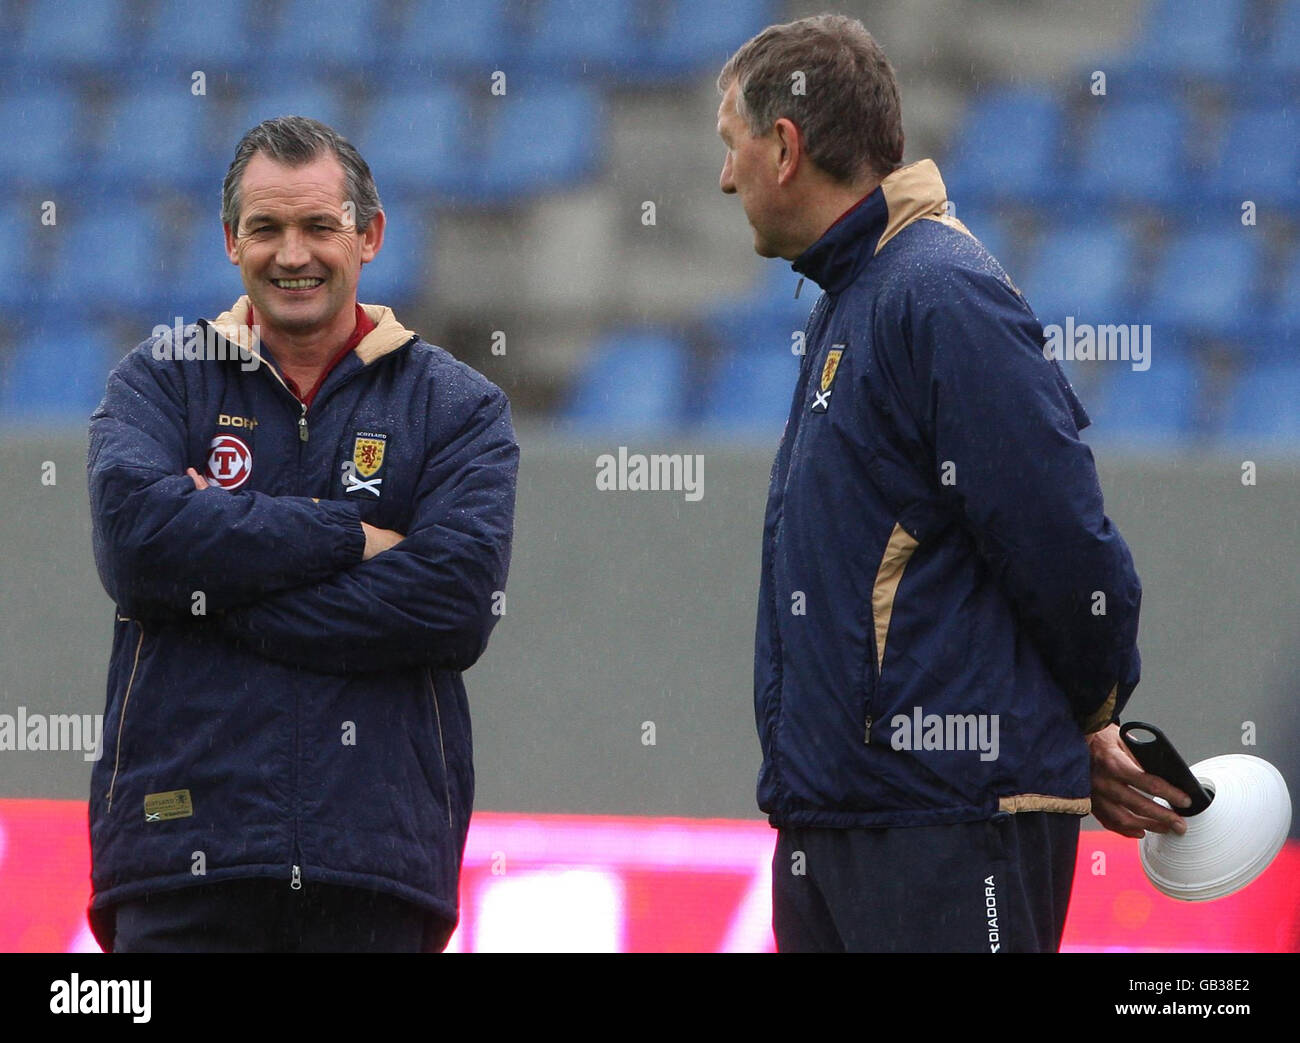 Soccer - FIFA World Cup 2010 - Qualifying Round - Group Nine - Scotland Training Session - Laugardalsvollur Stadium. Scotland's manager George Burley during the training session at the Laugardalsvollur Stadium, Reykjavik. Stock Photo